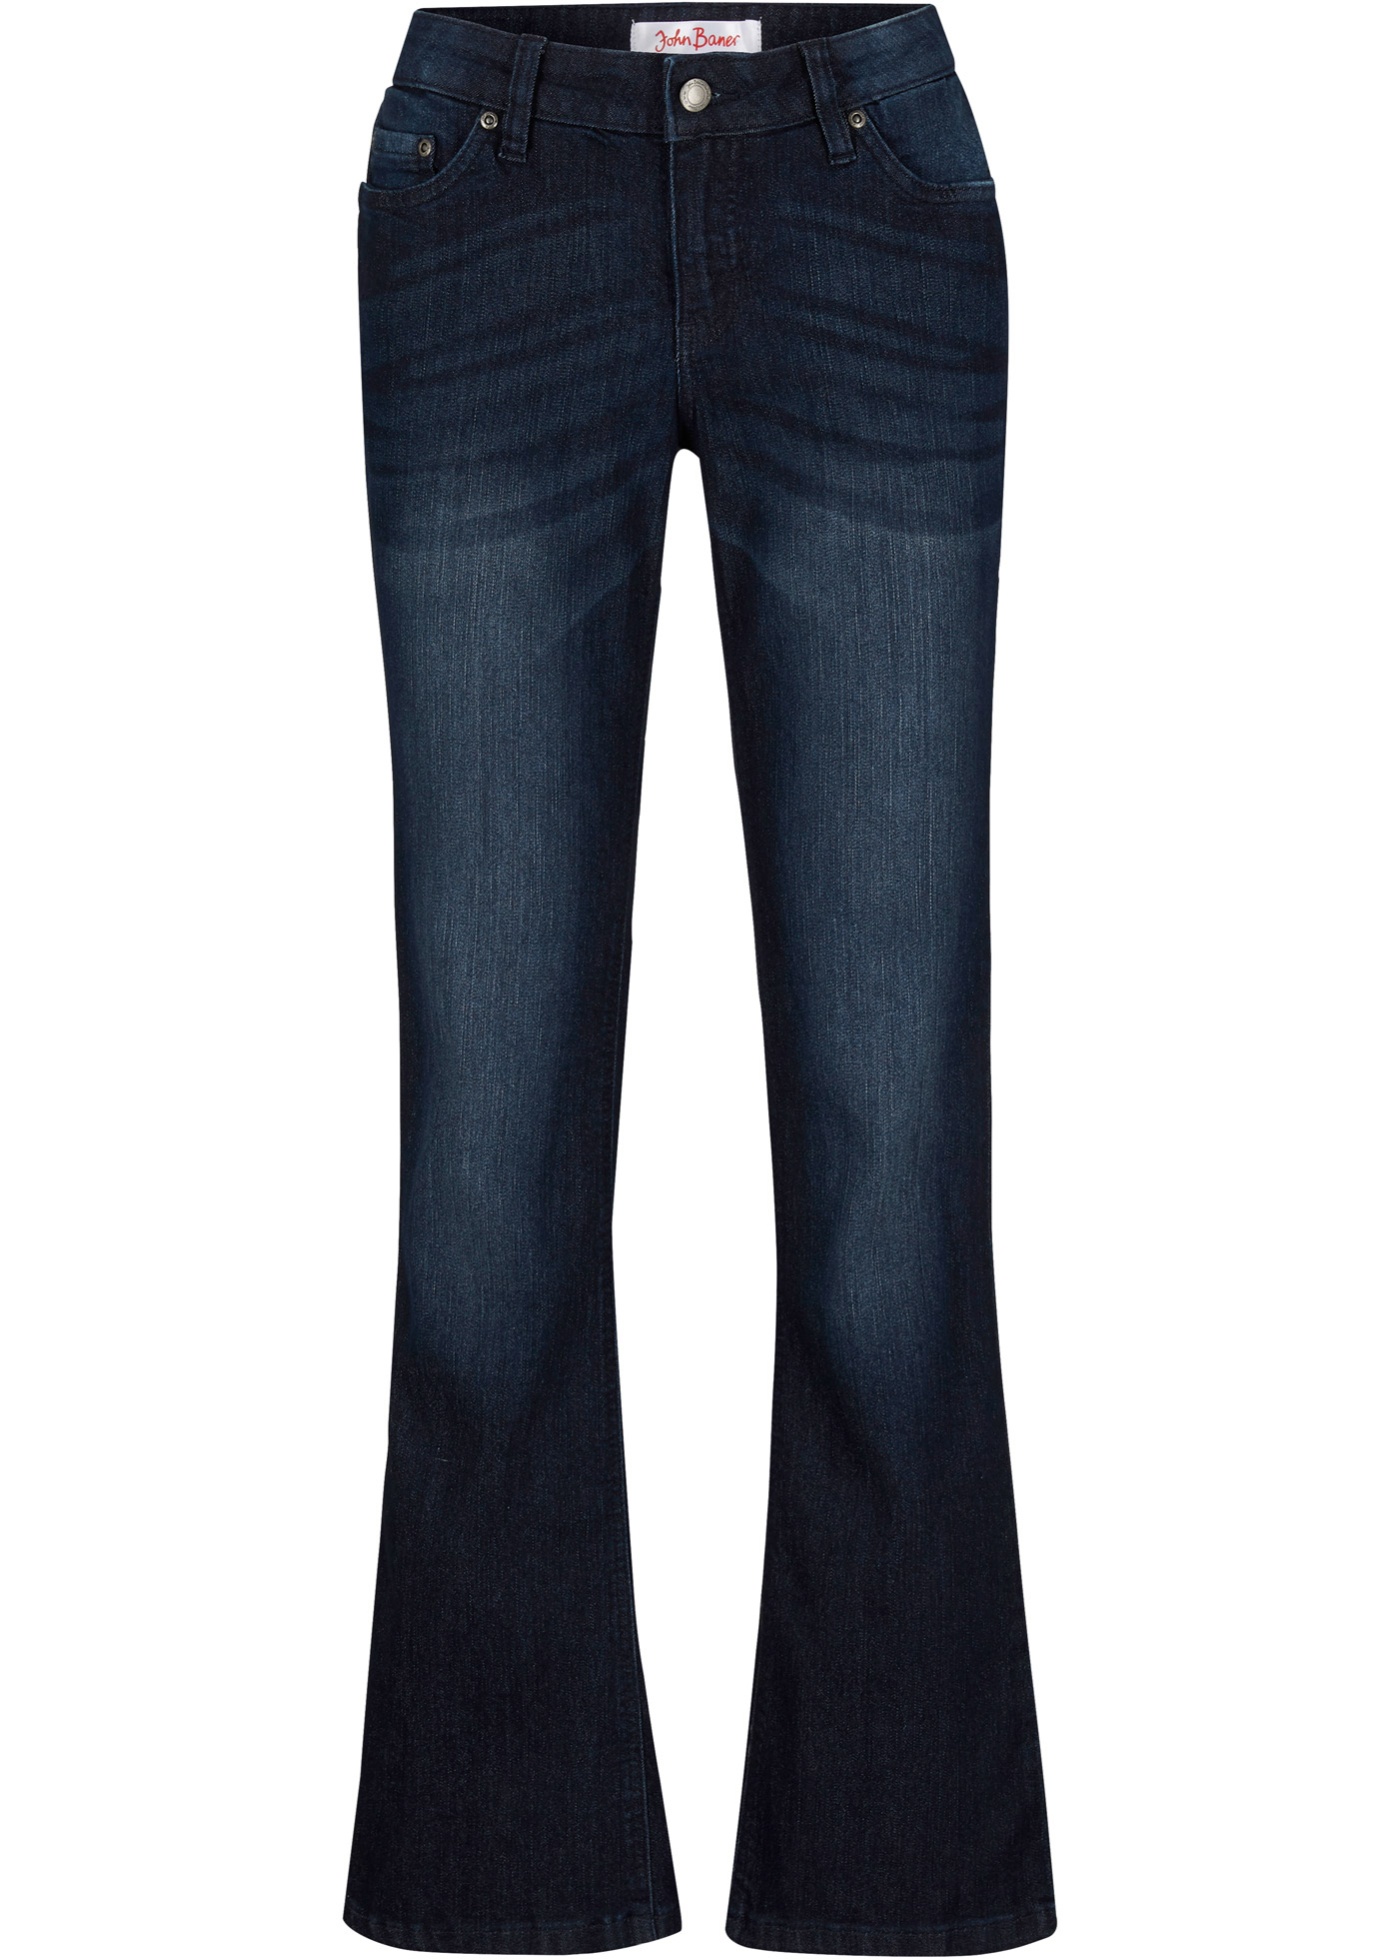 Comfort stretch jeans, bootcut